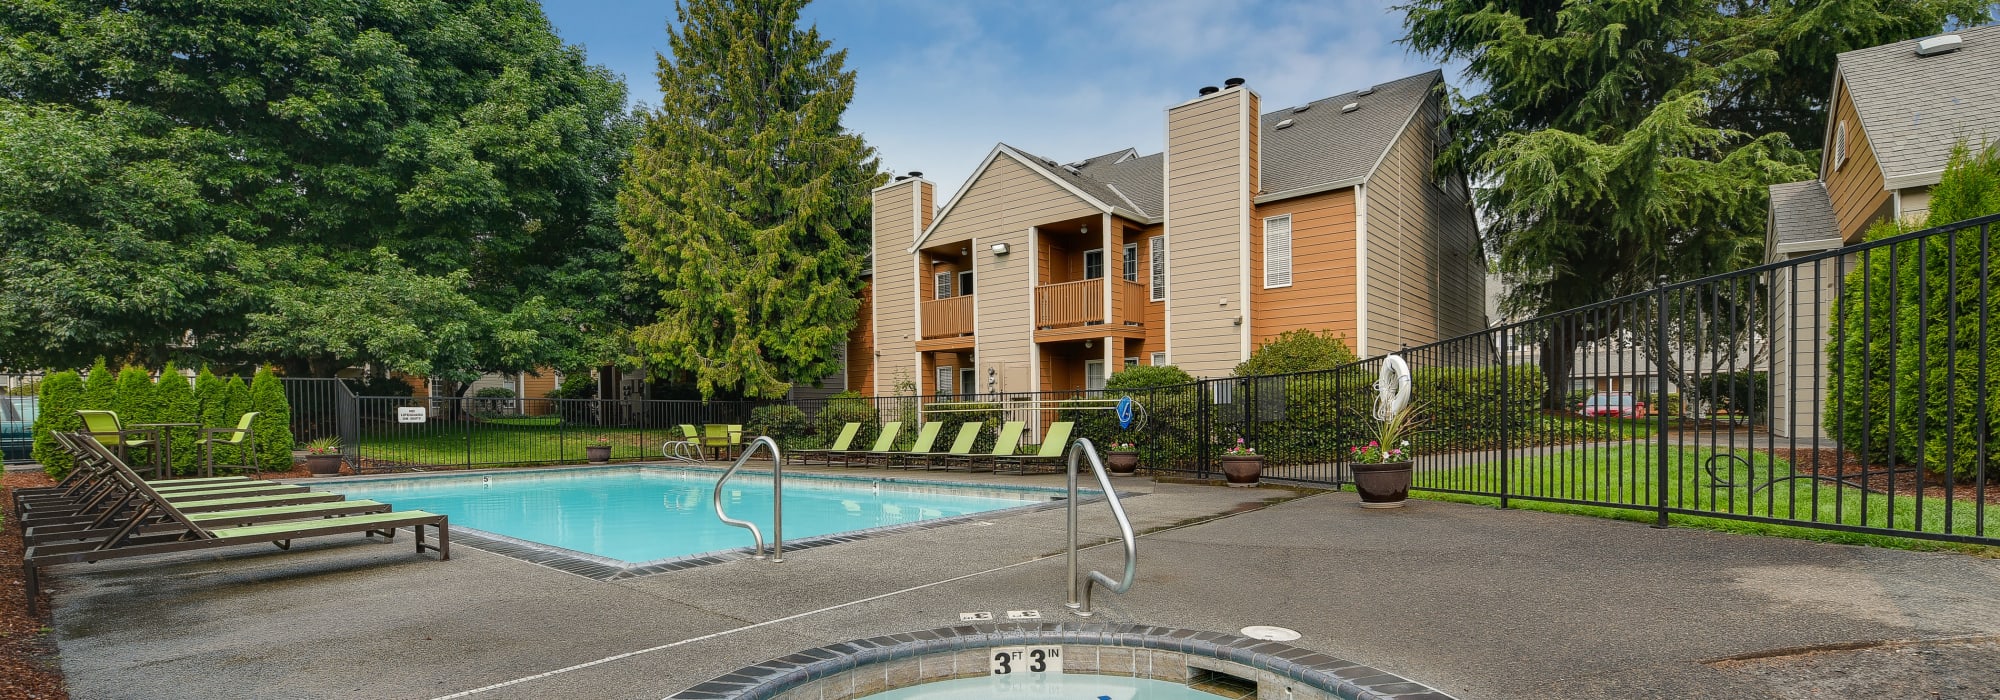 Apply to Carriage House Apartments in Vancouver, Washington